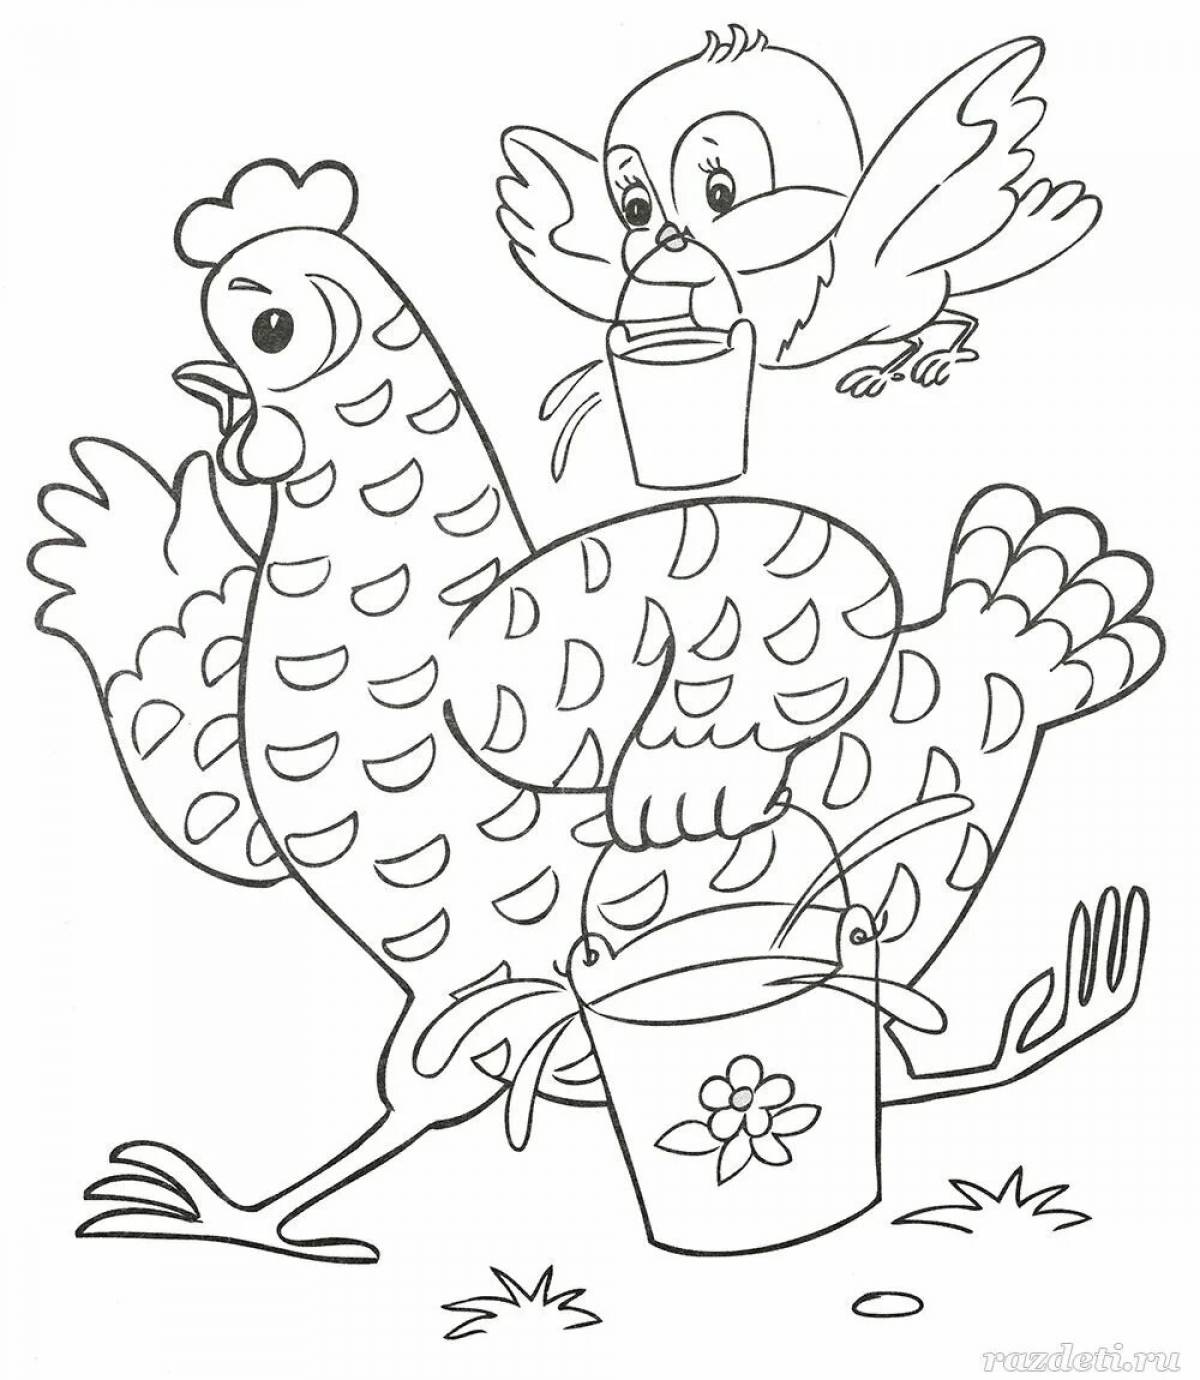 Incomparable cat house coloring book for 3-4 year olds